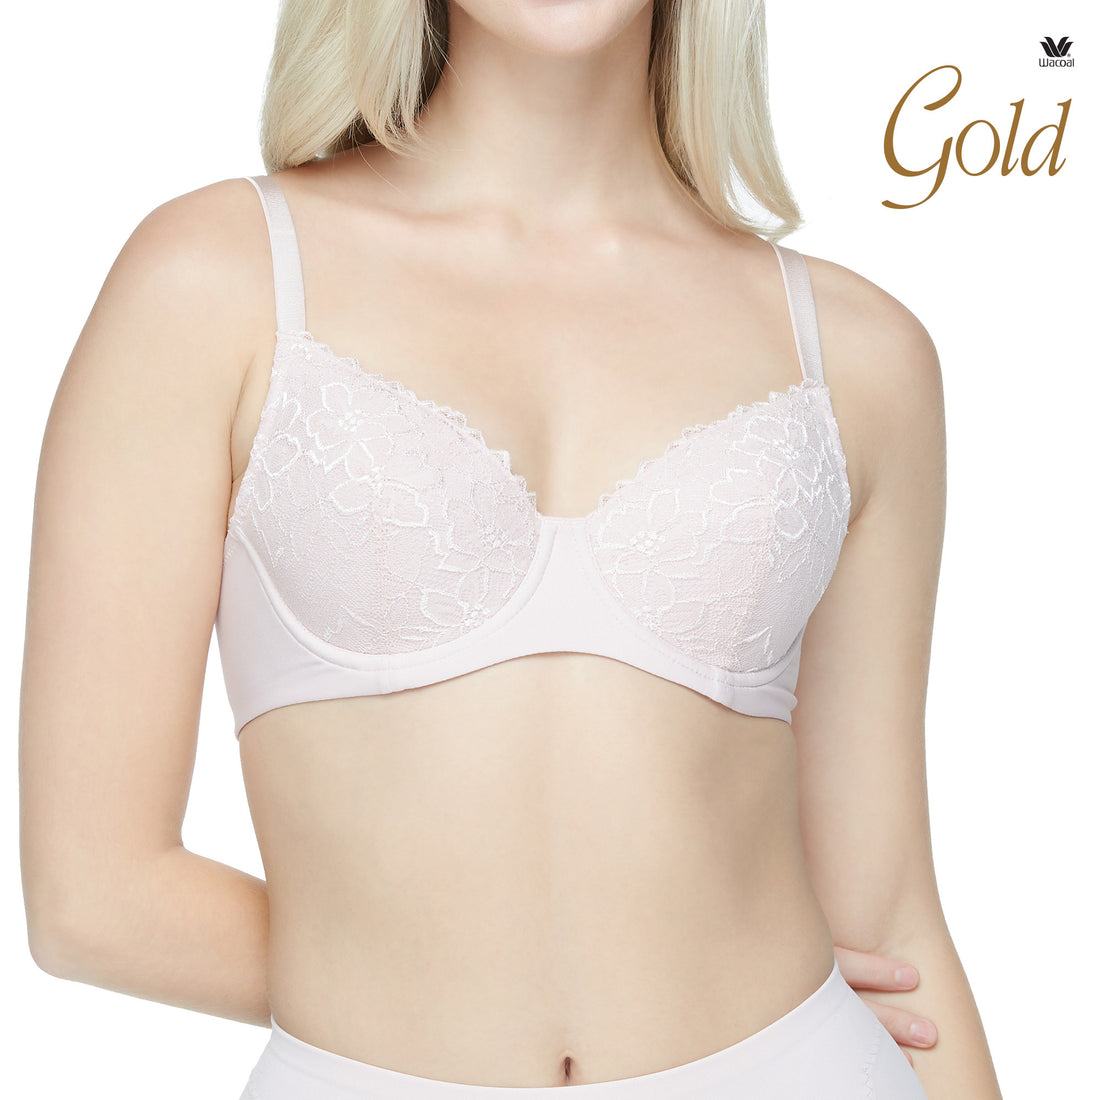 Wacoal Gold, a healthy bra with soft underwire support No sponge added, model WO1725 (paired with WO3116), wild rose pink (WR)